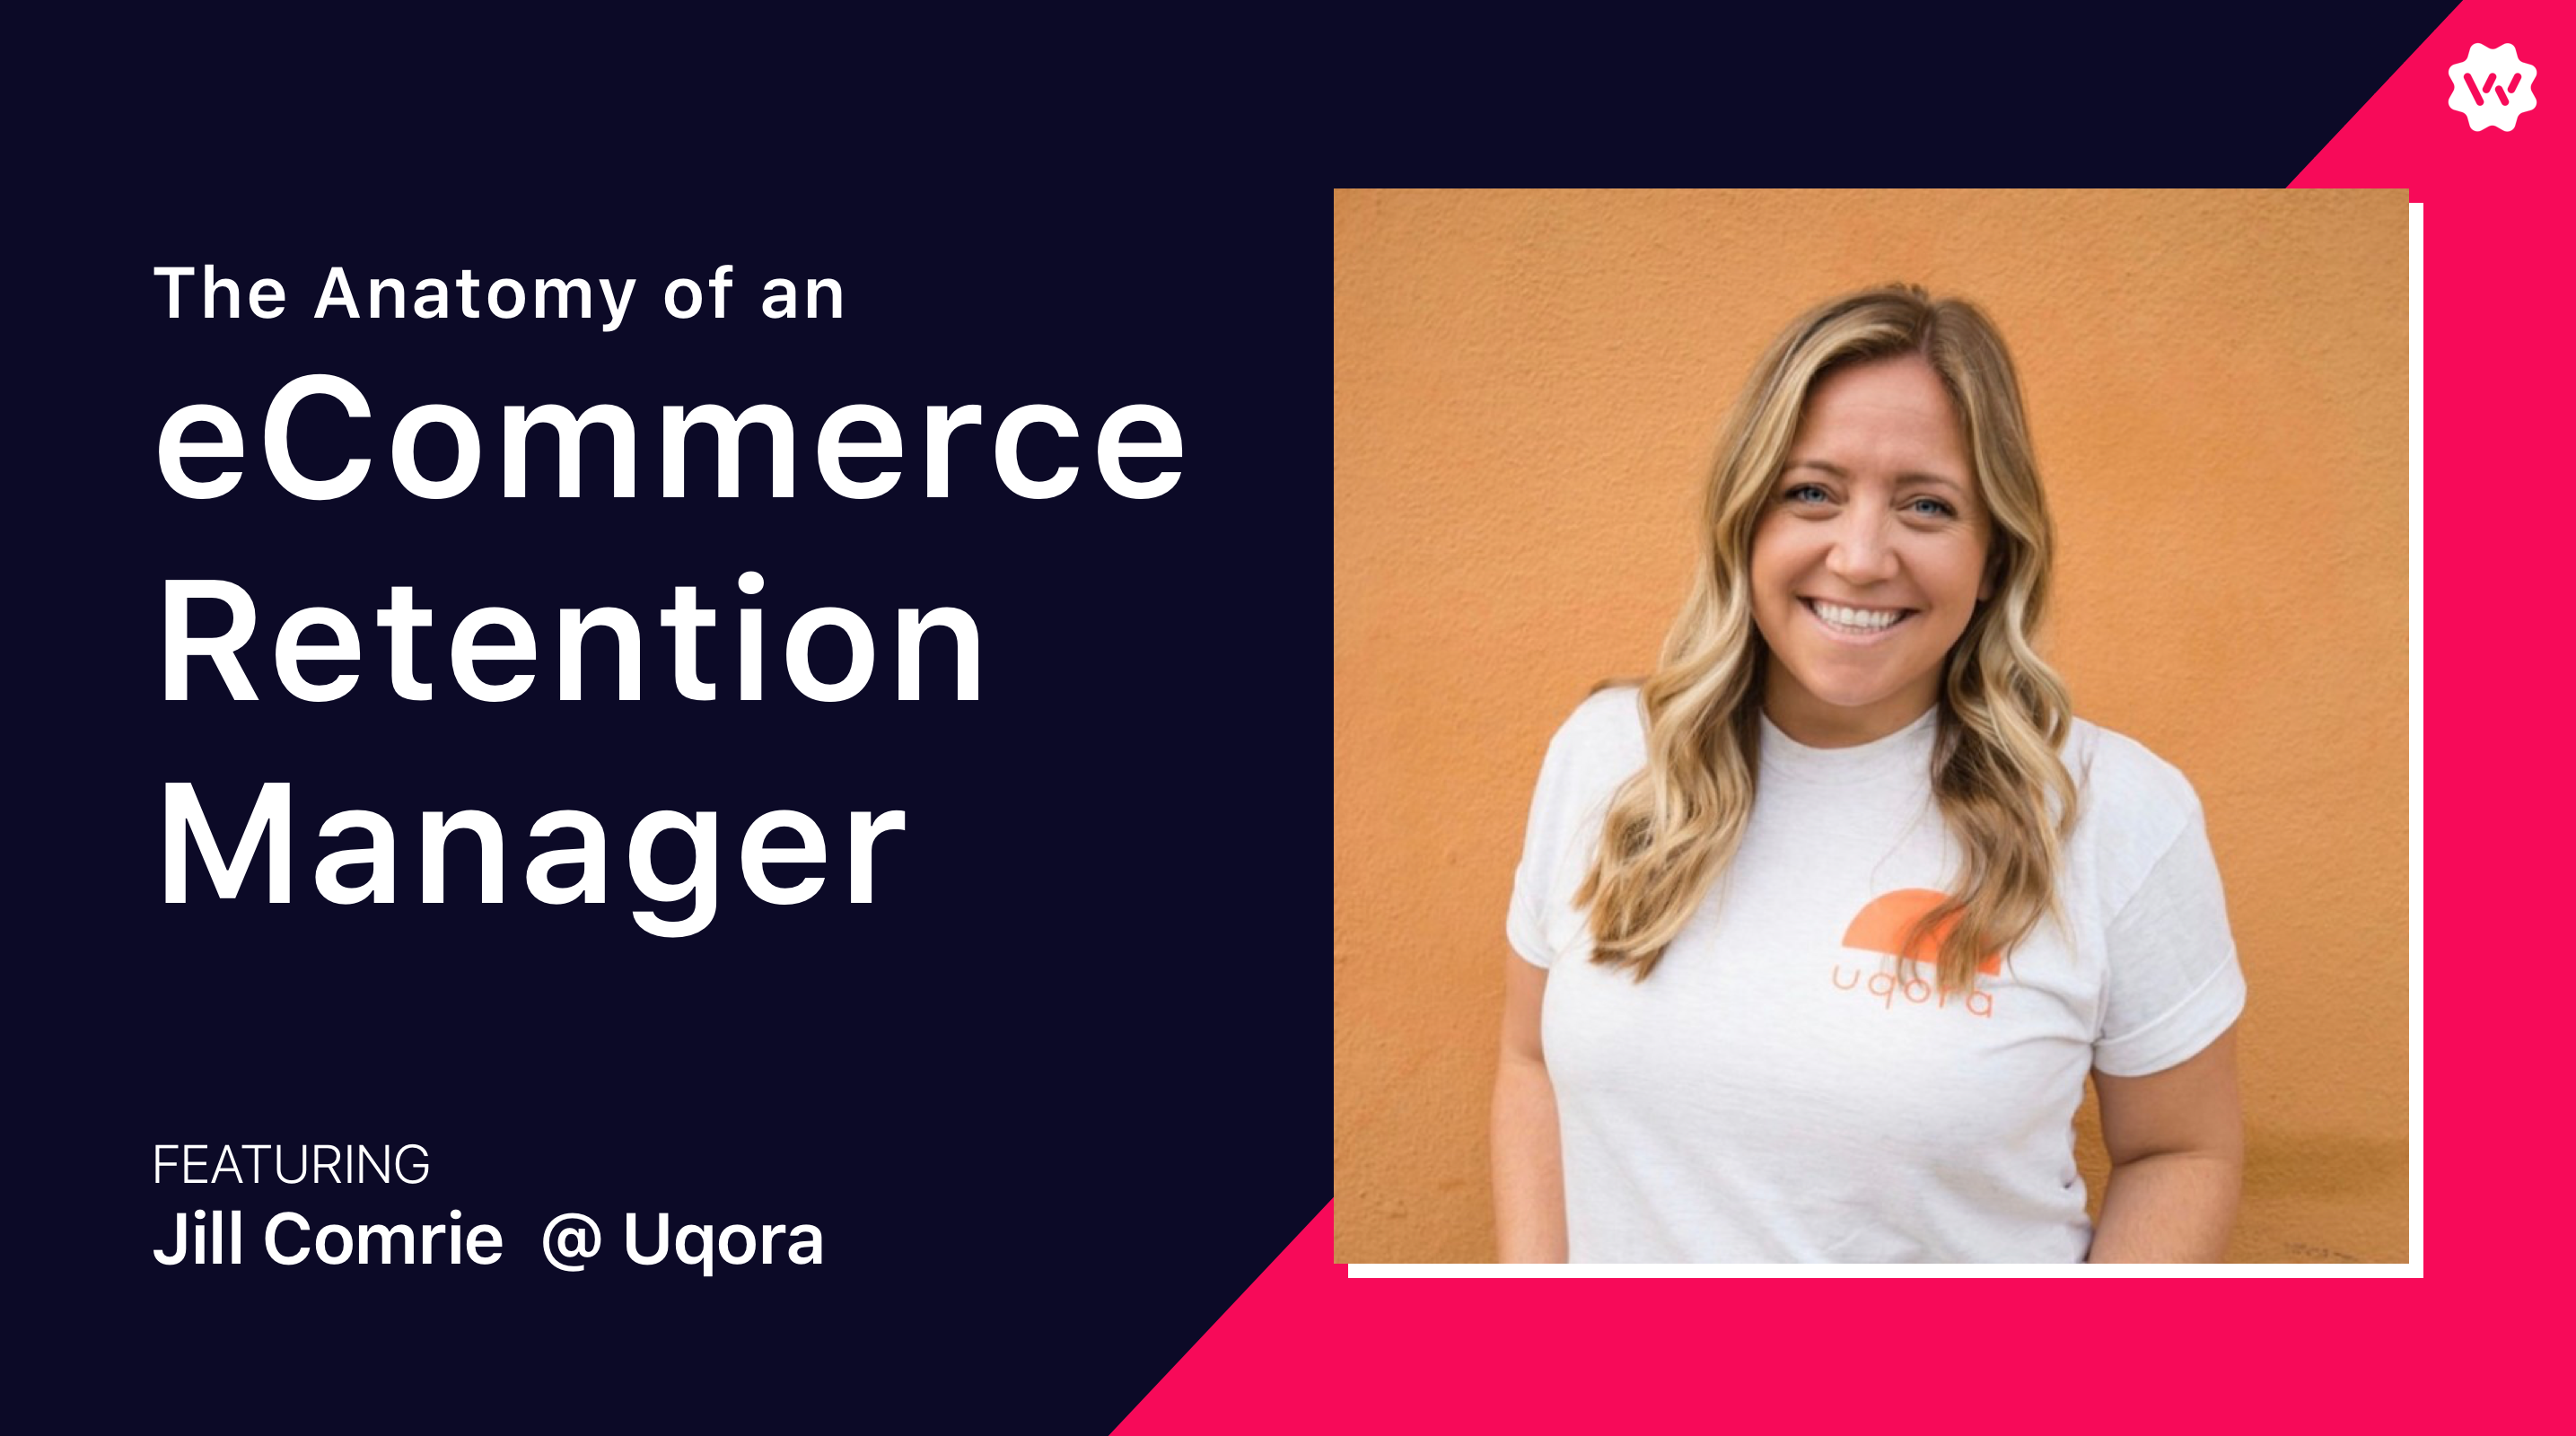 The Anatomy of an eCommerce Retention Manager: Jill Comrie of Uqora